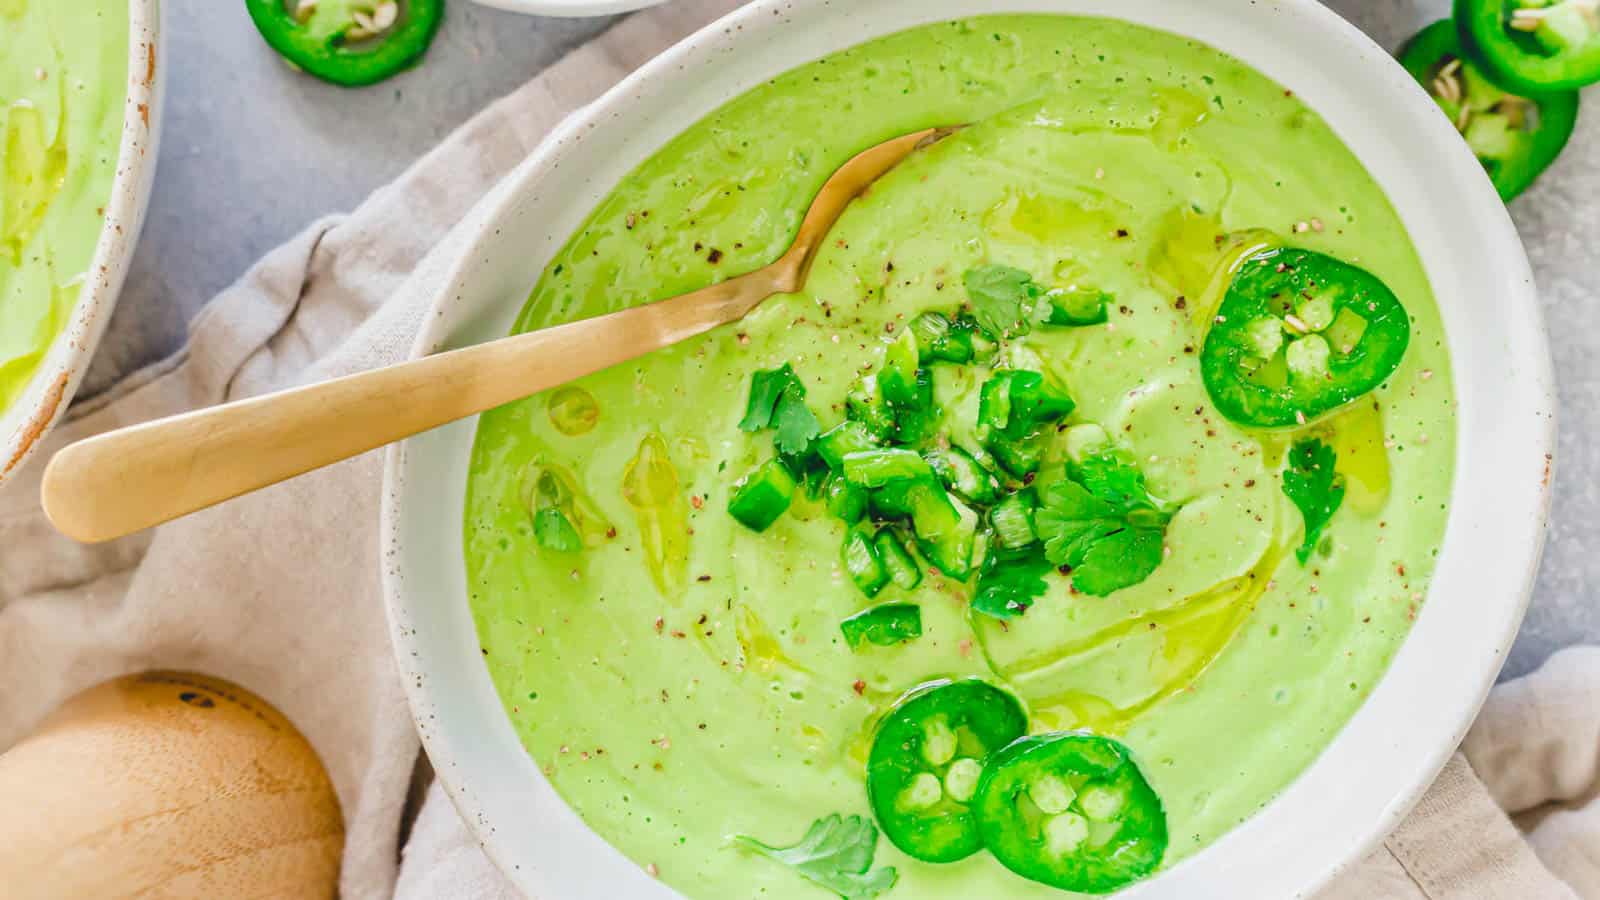 Cold avocado soup garnished with diced jalapeno, cilantro and olive oil.